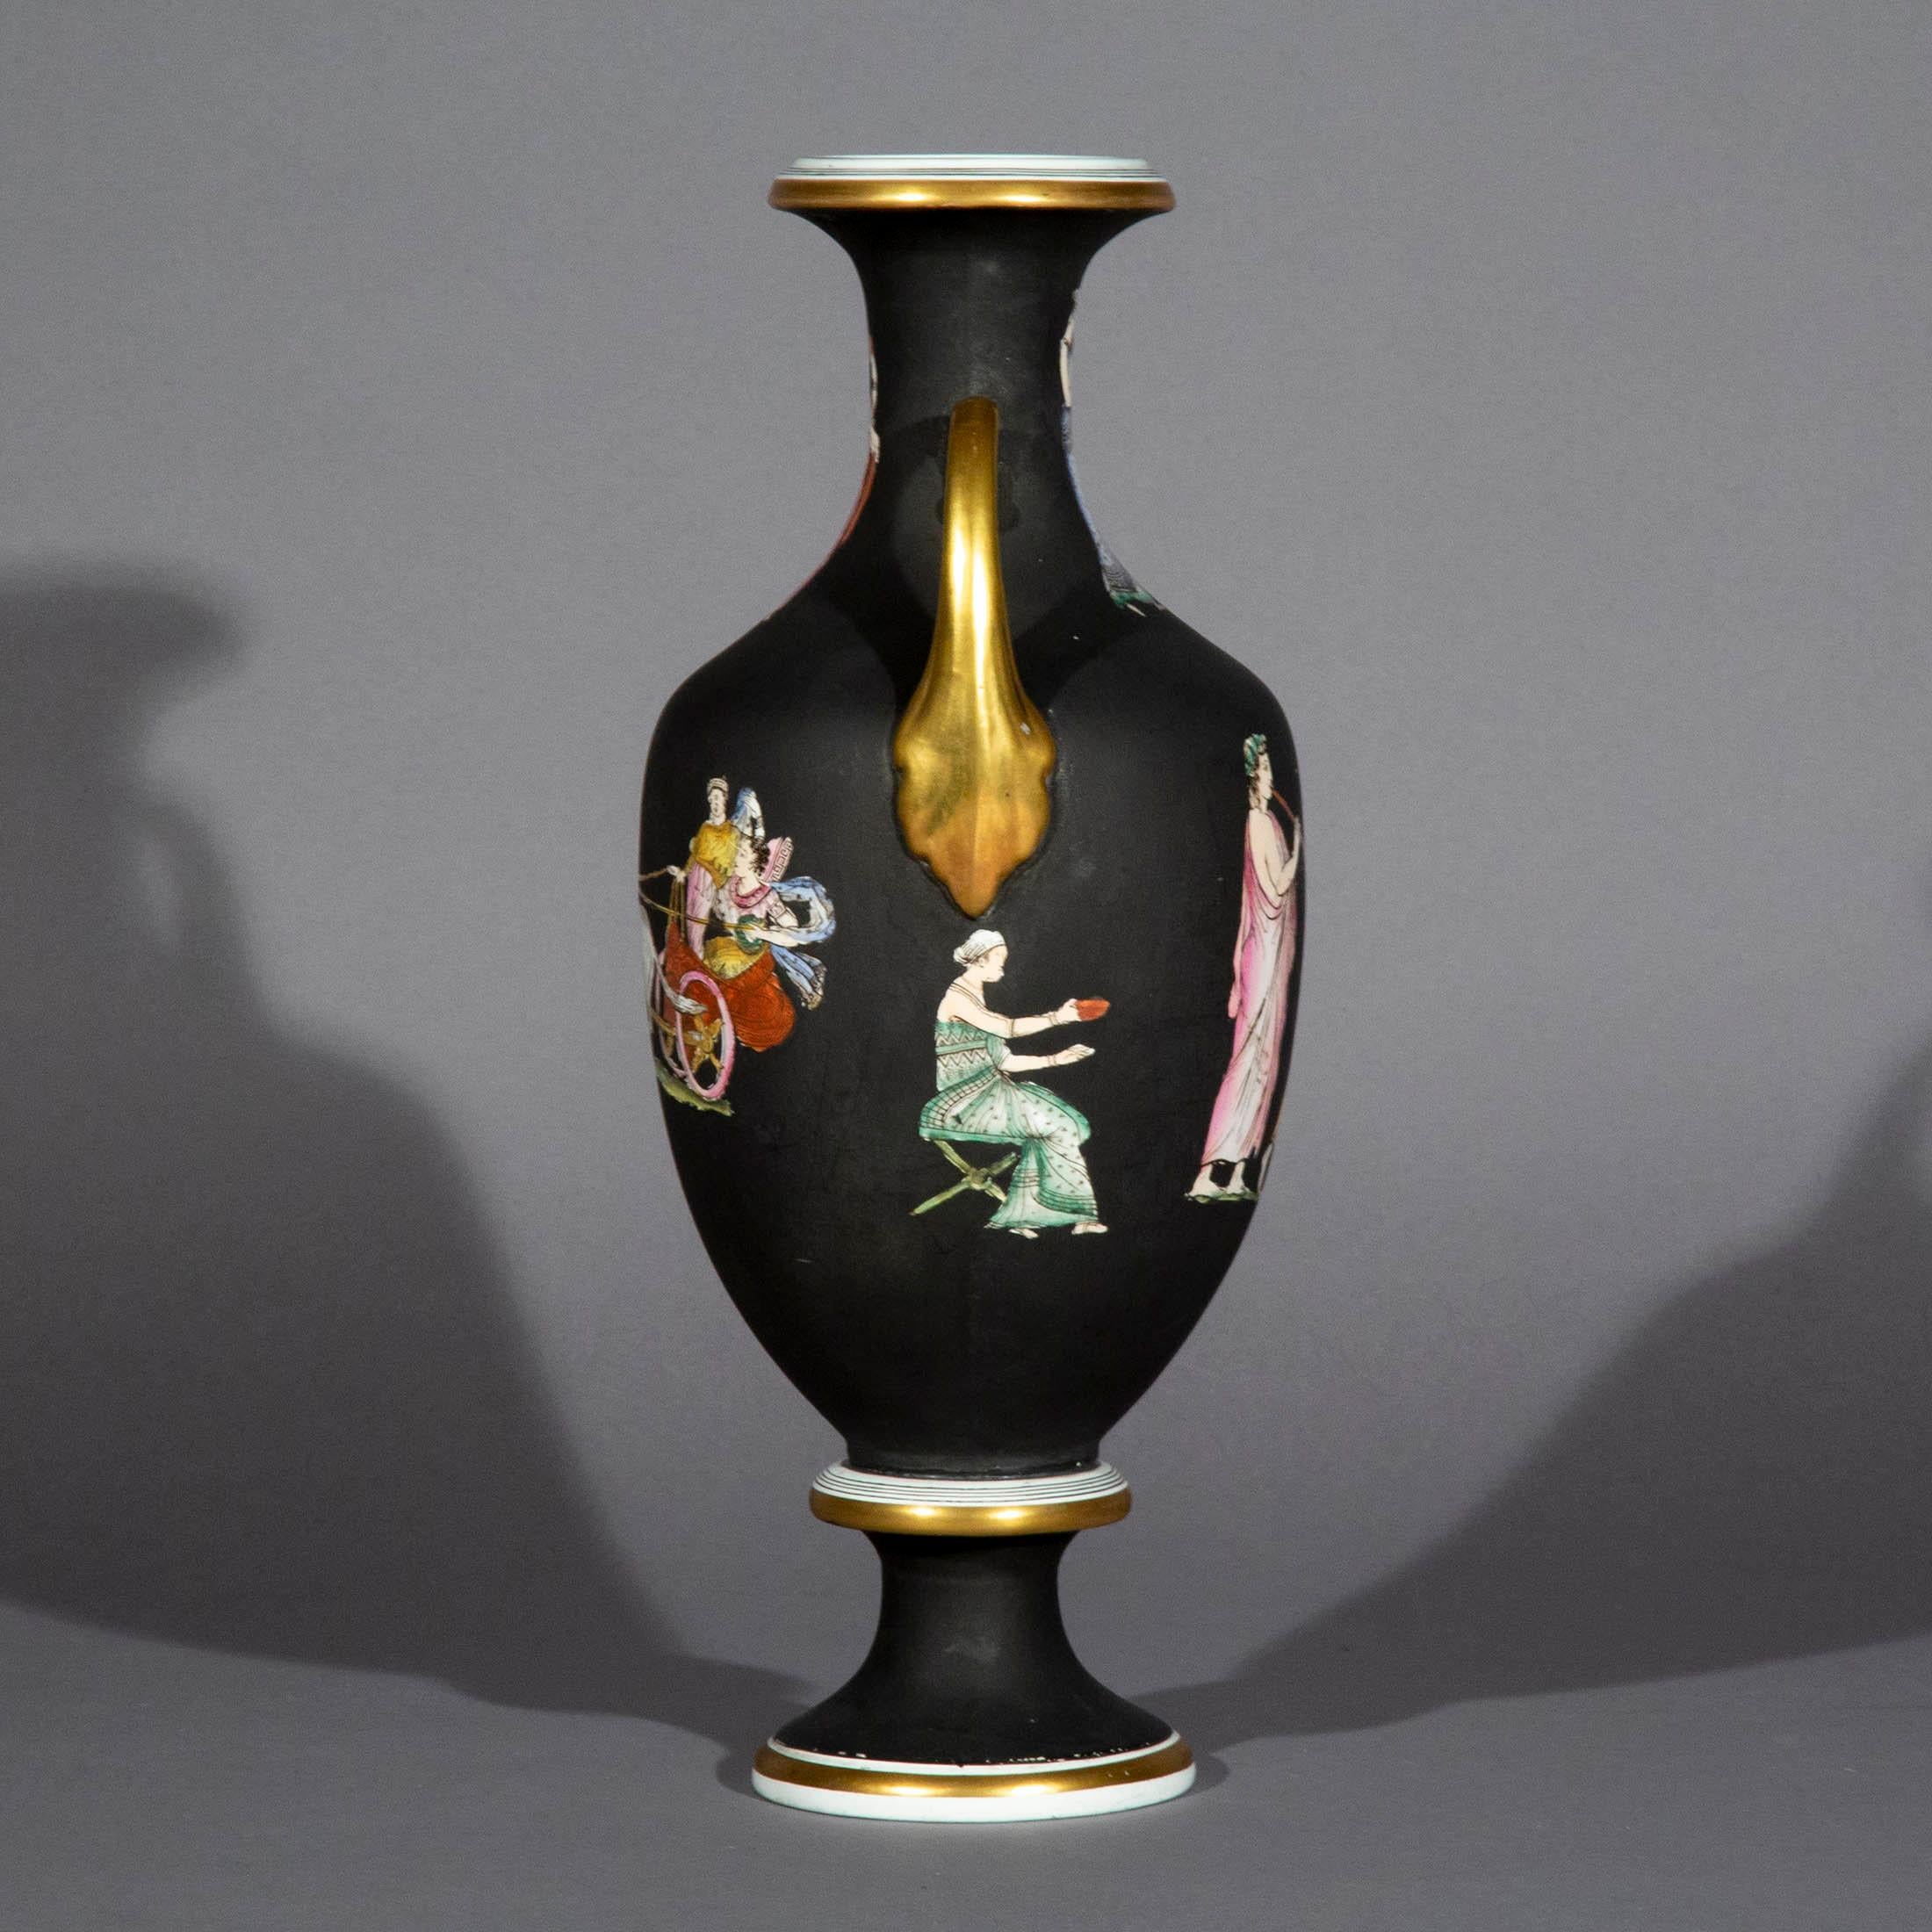 Regency Antique Grand Tour Urn Vase, Early 19th Century For Sale